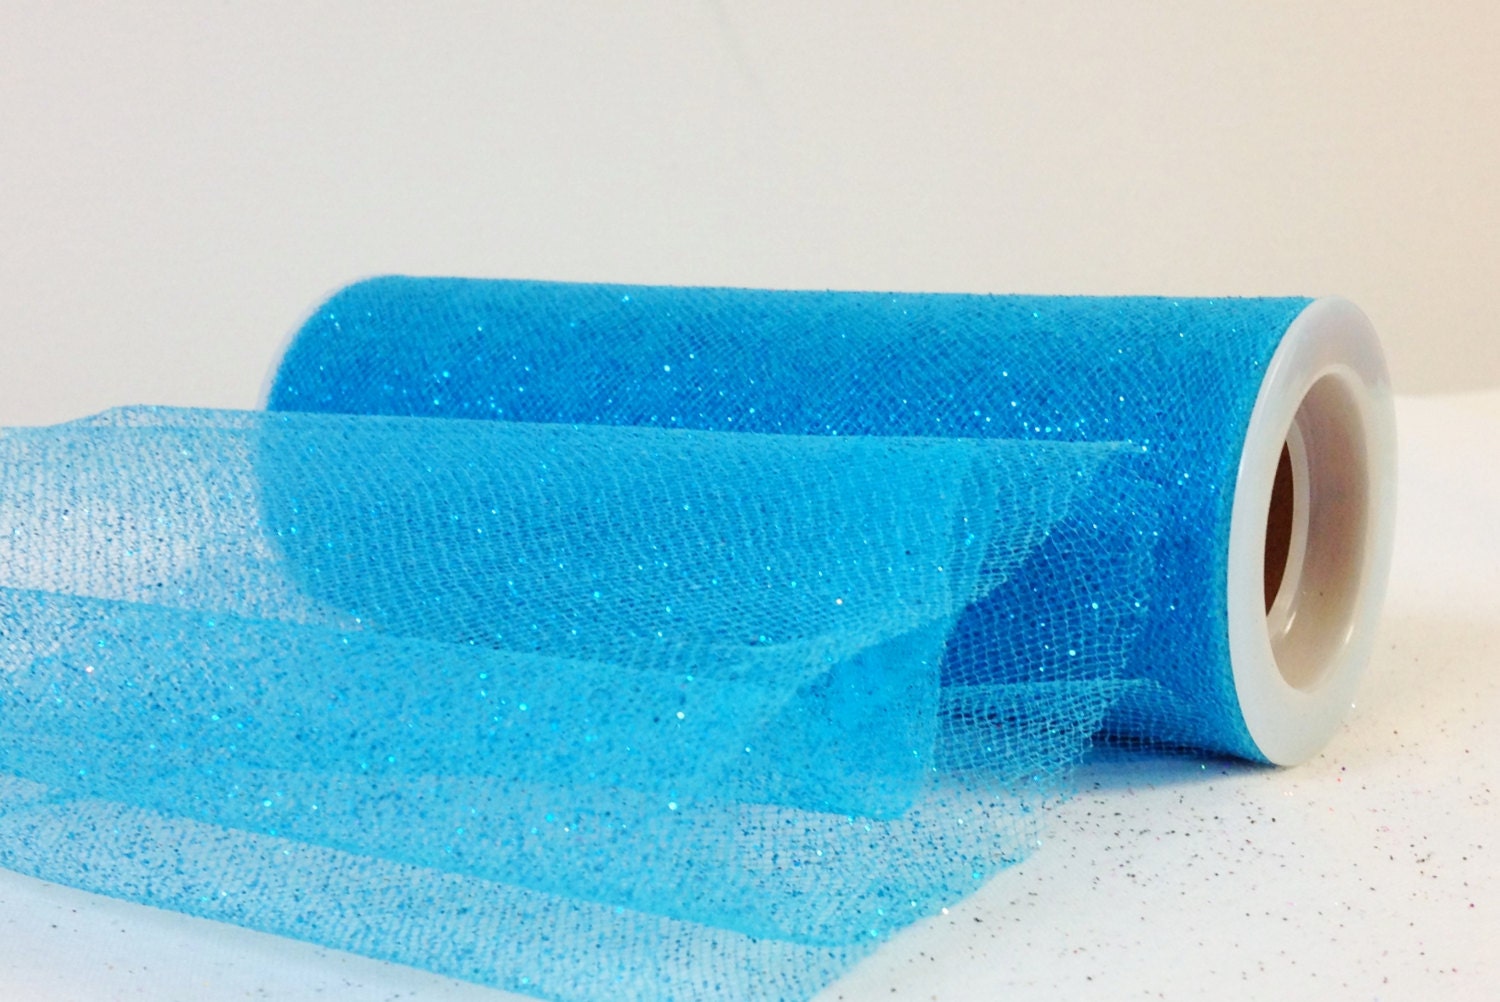 3 Premium Tulle Fabric Roll For Crafts, Wedding, Party Decorations, Gifts  - Teal 25 Yard Spool